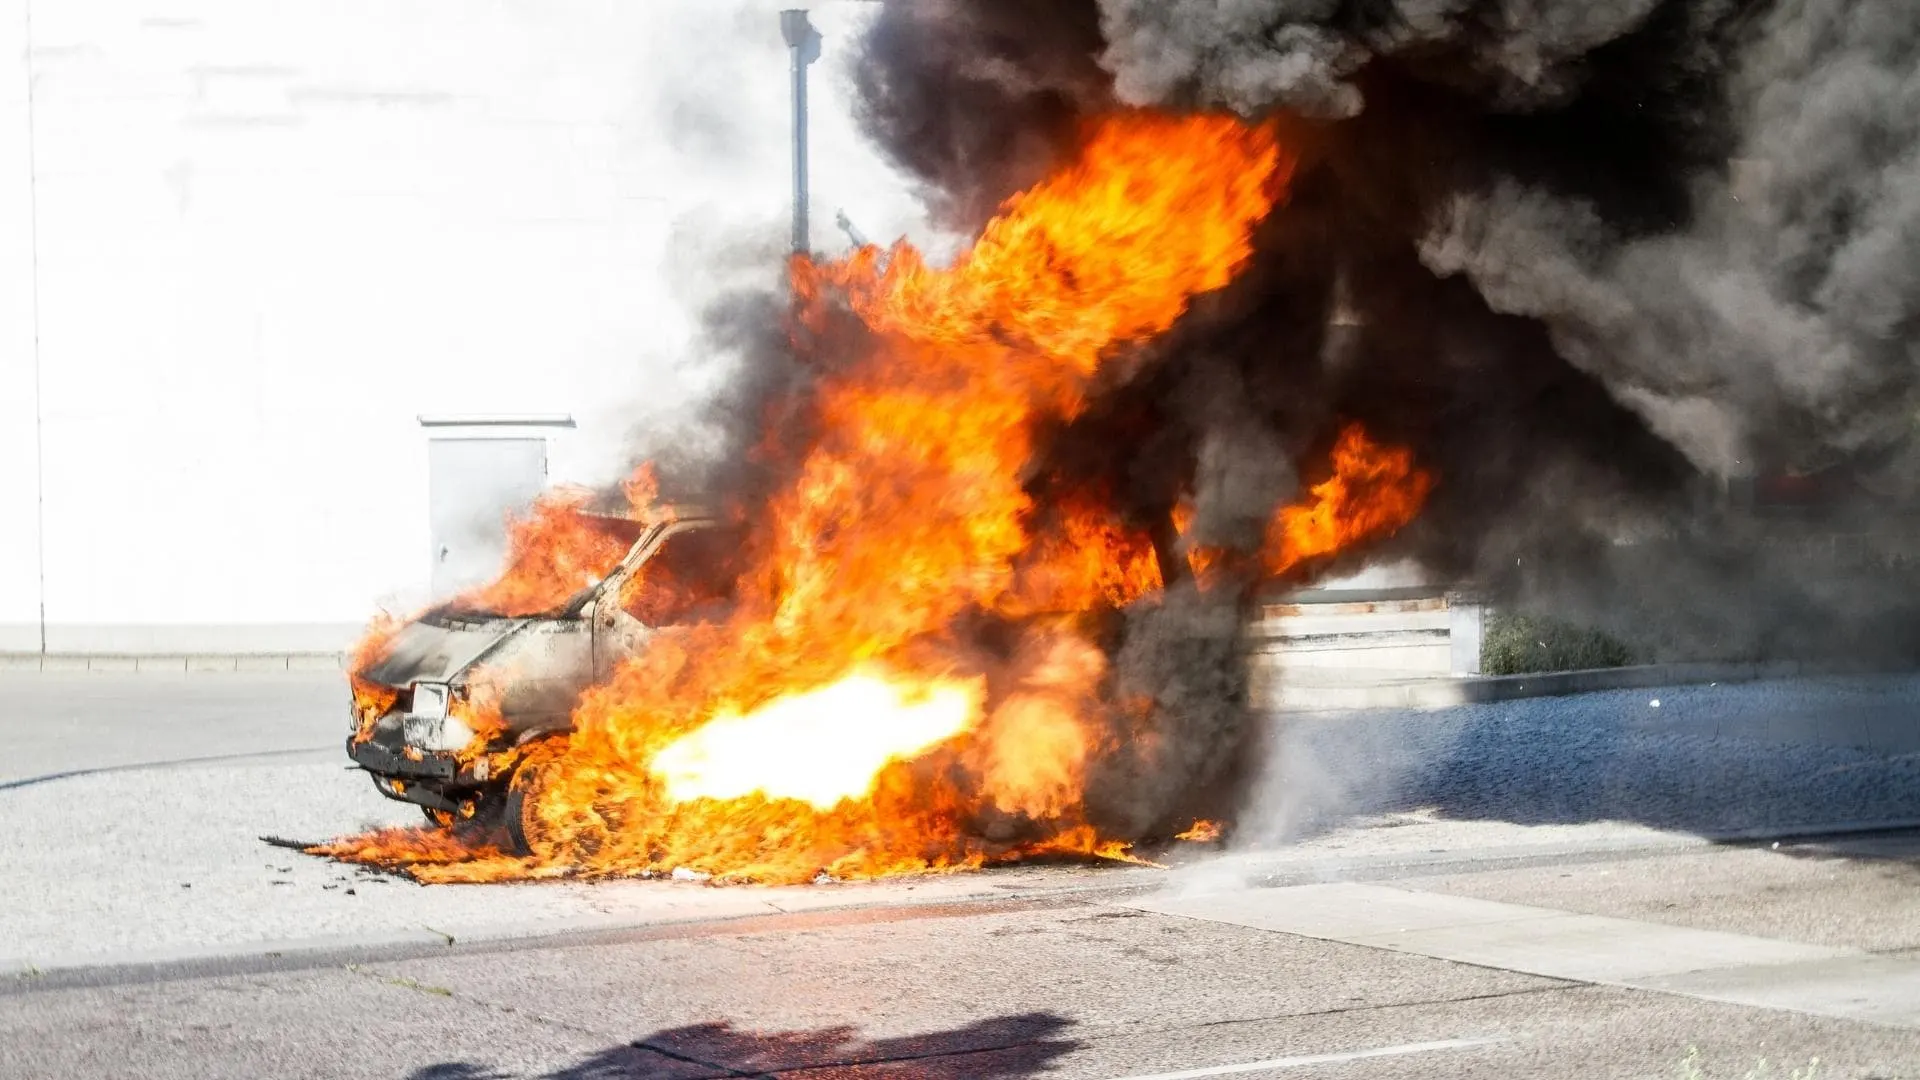 Photo of a small van fully engulfed in flames